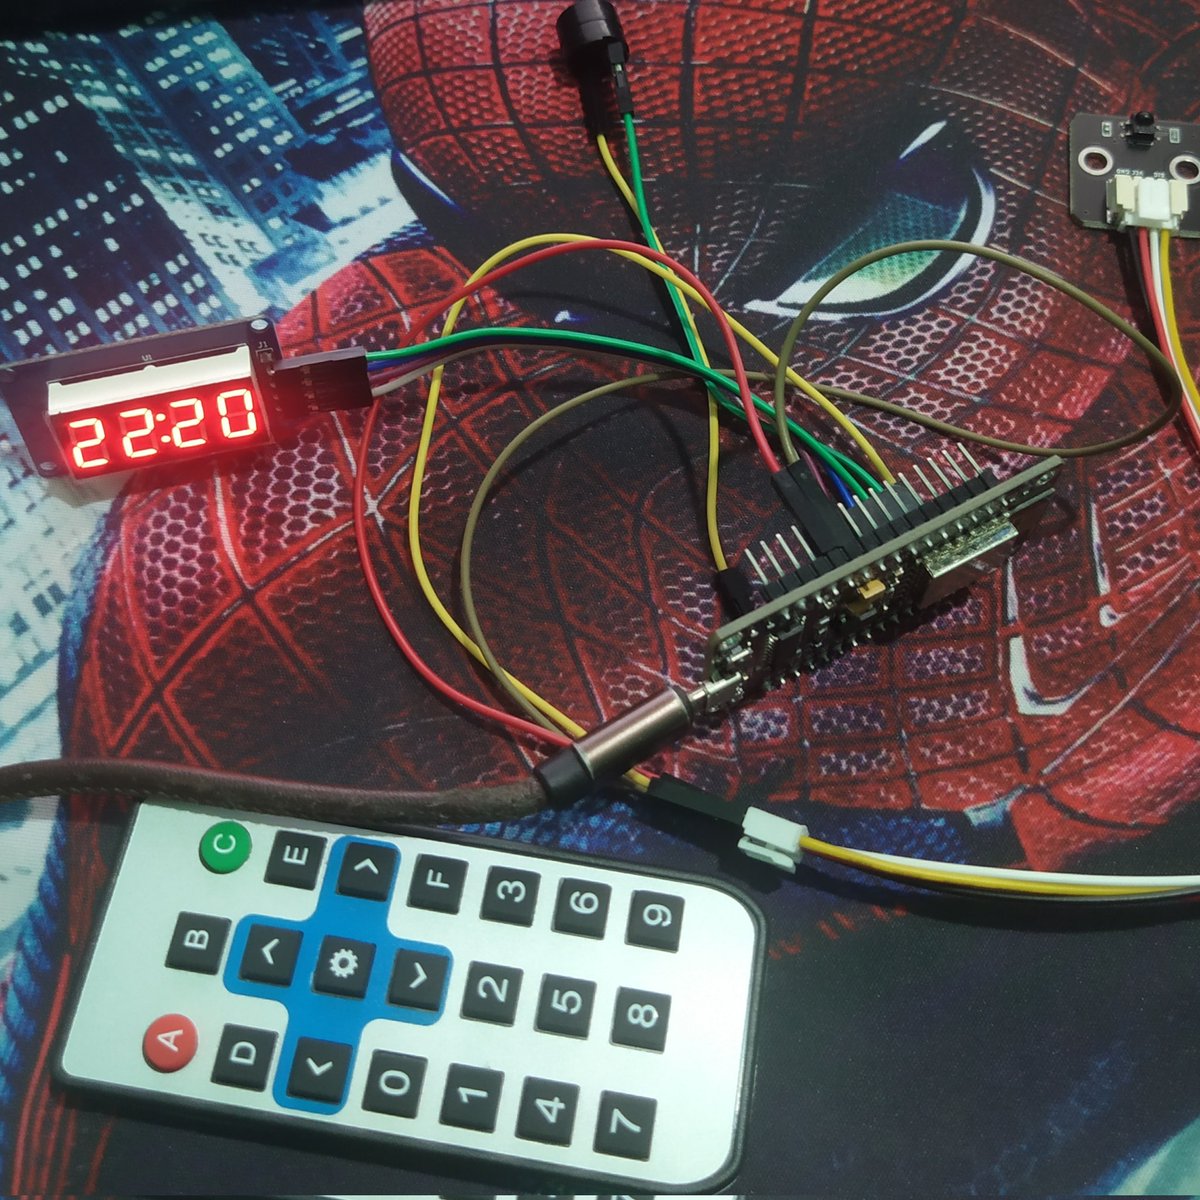 Why do clocks adjust 2 digits at a time instead of 1 digit at a time? @matiaspujado #arduino #code #clock